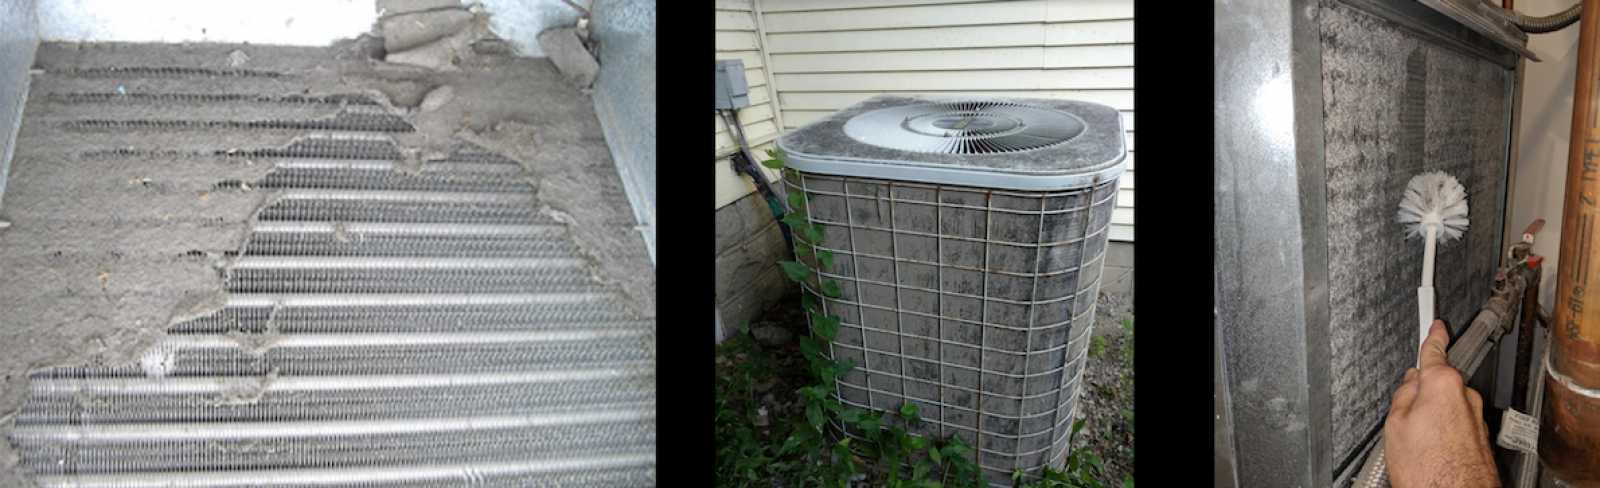 How Often Should I Clean My Evaporator Condenser Coil